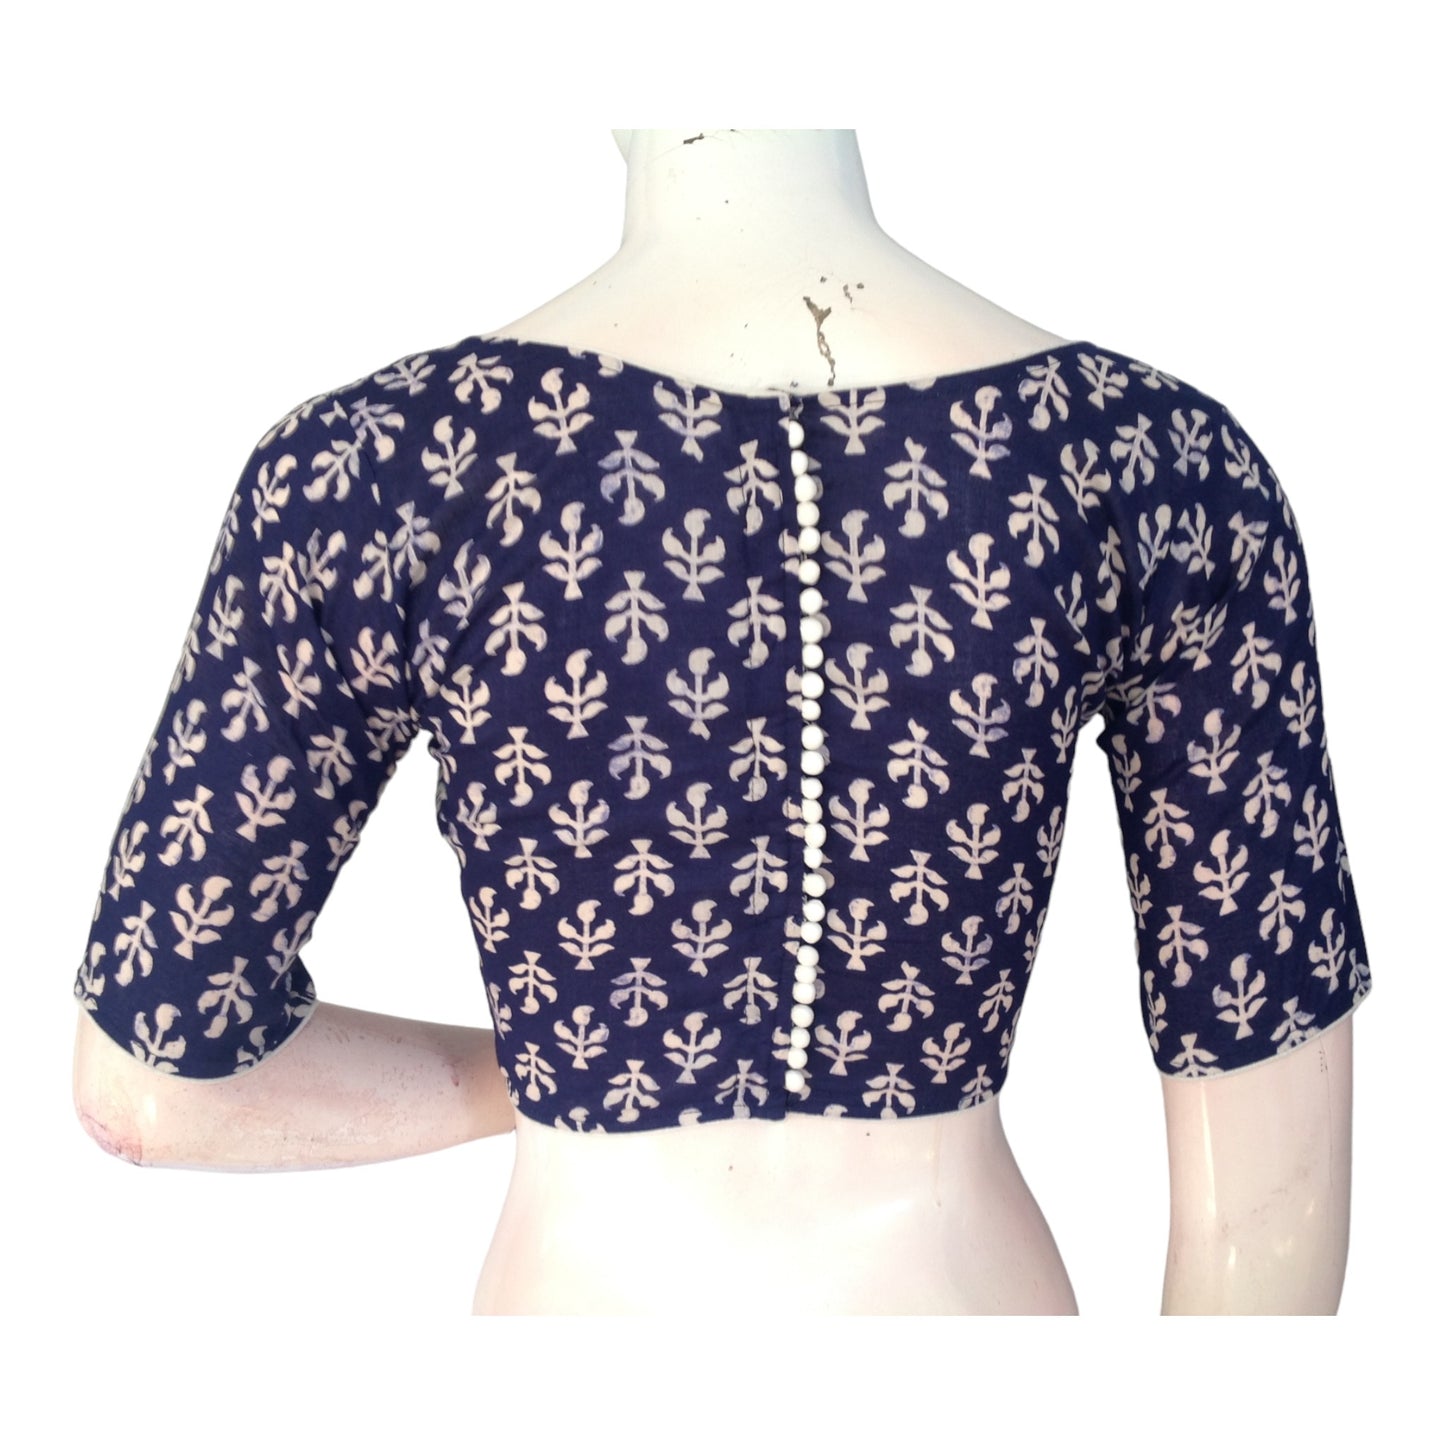 Navy Blue High Neck Saree Blouse | Cotton Elegance | Ready-to-Wear | Made in India